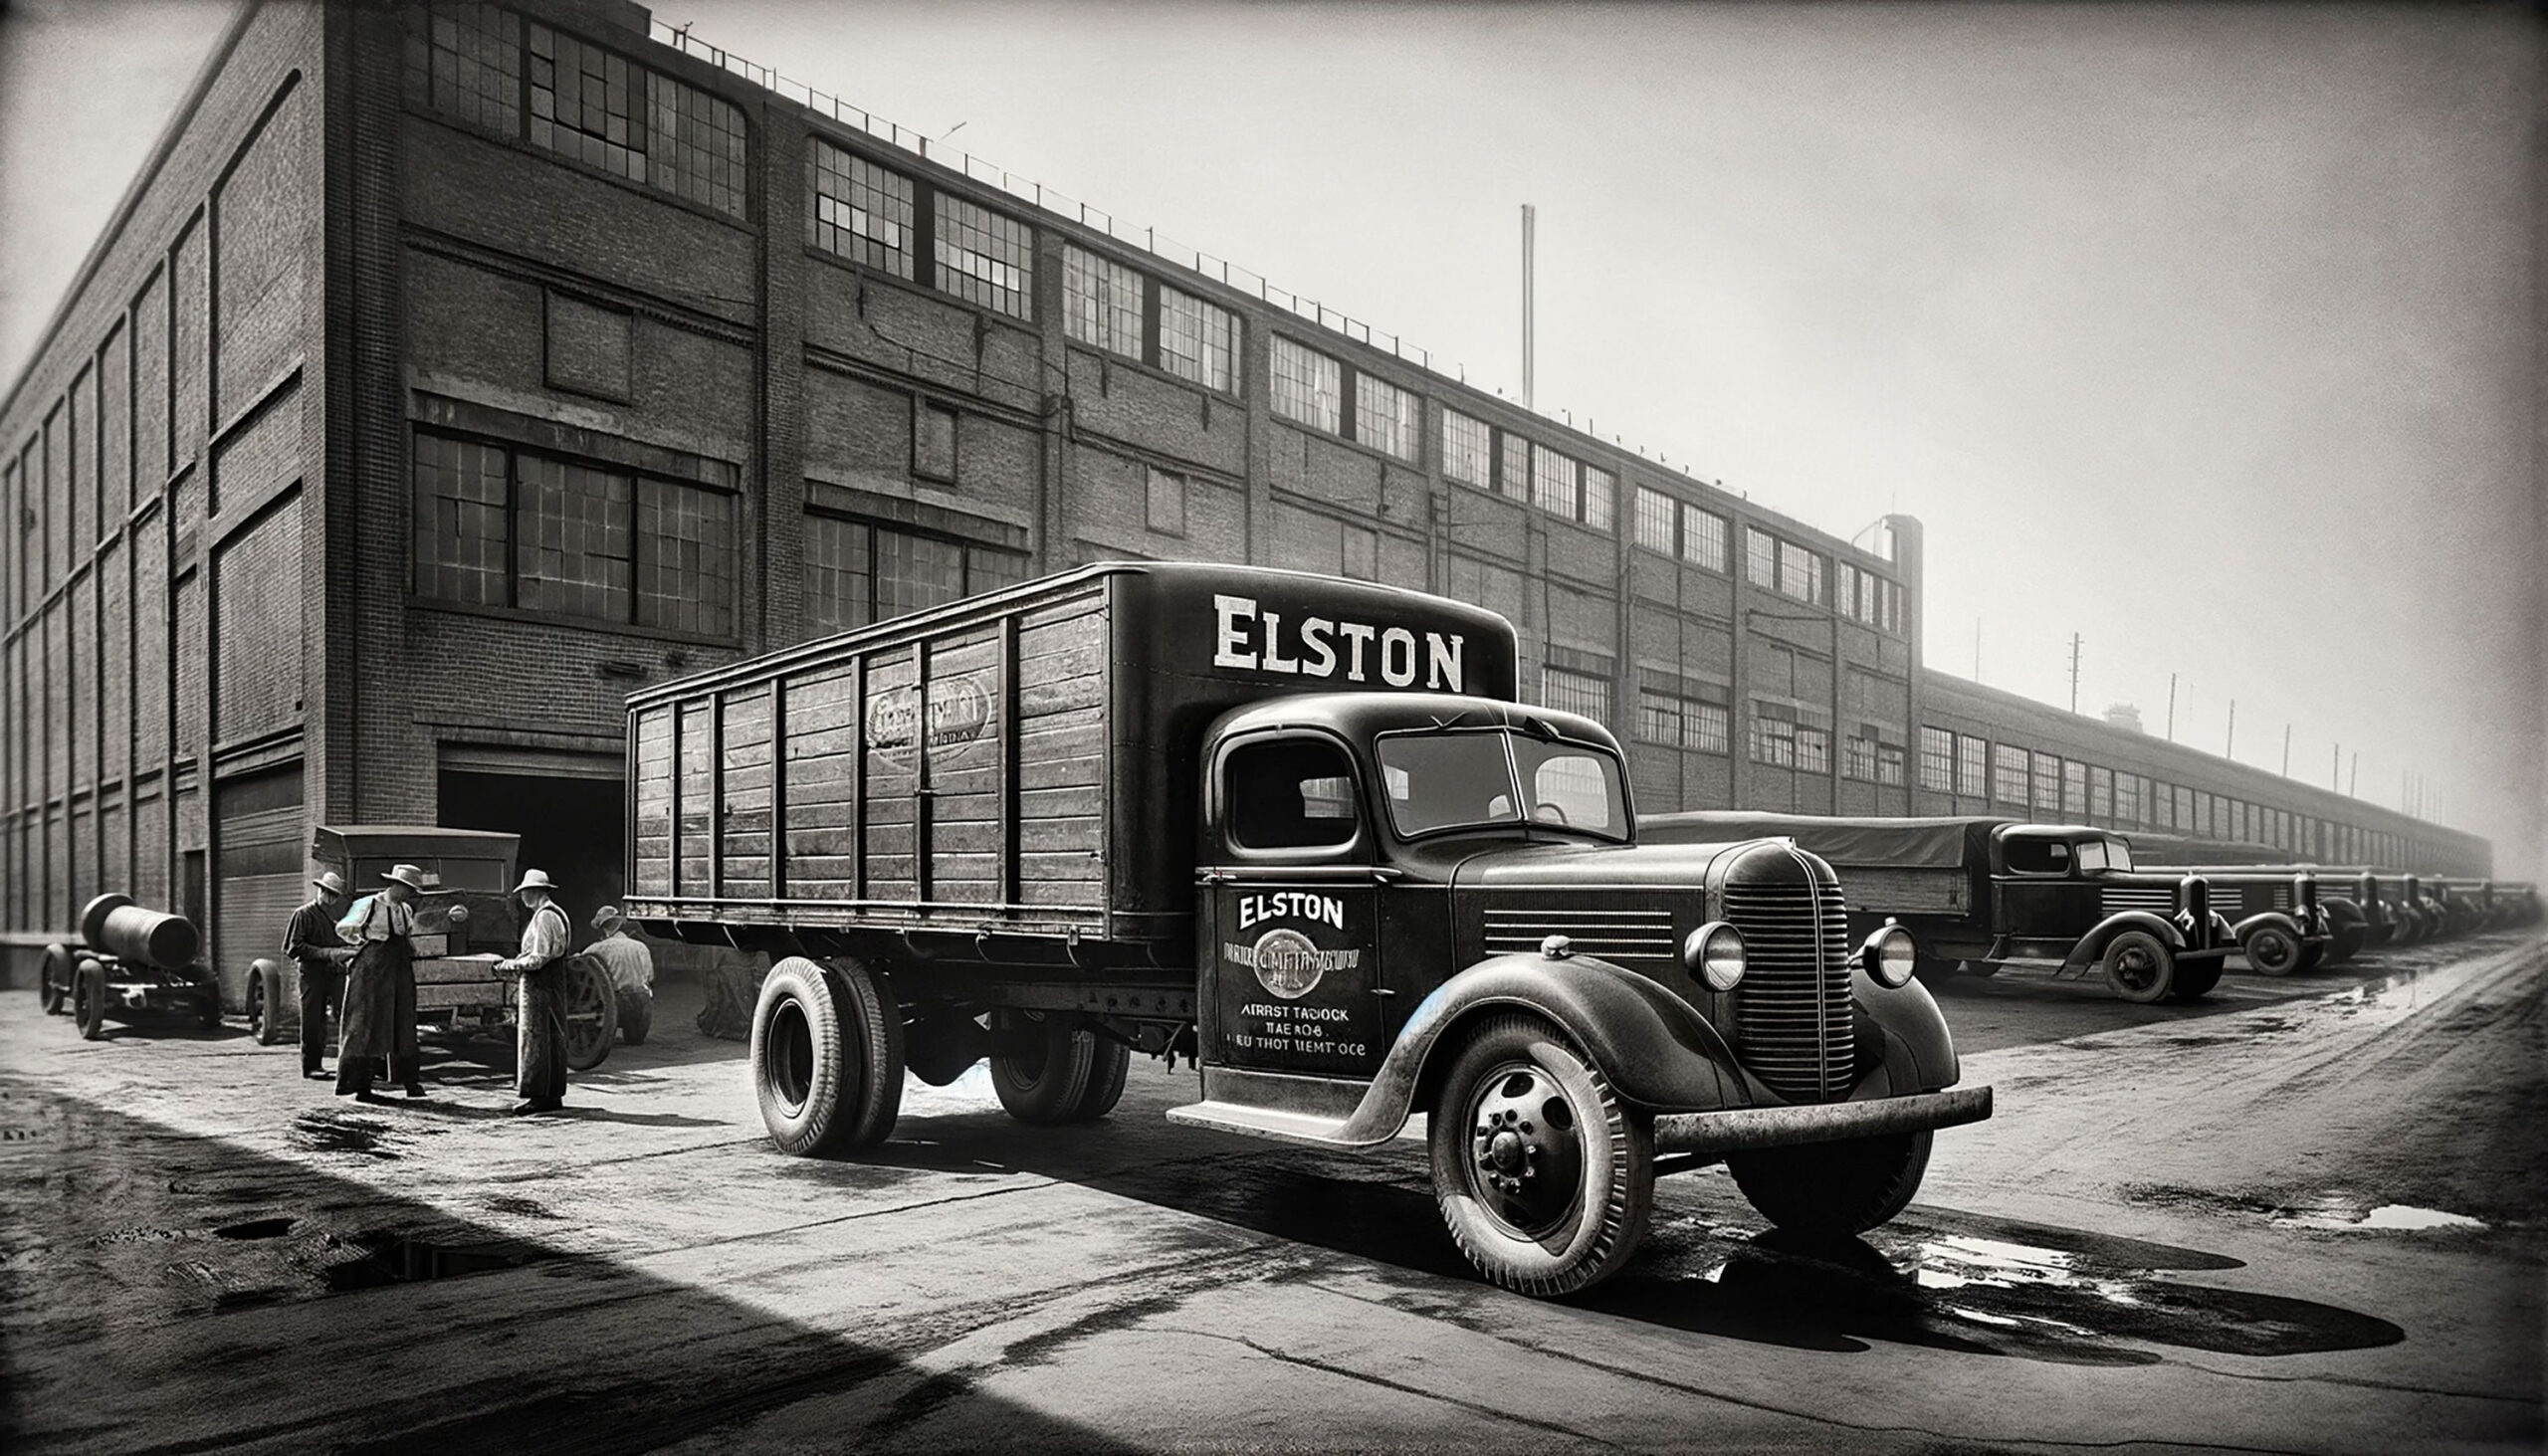 Vintage Elston truck from the 1950s